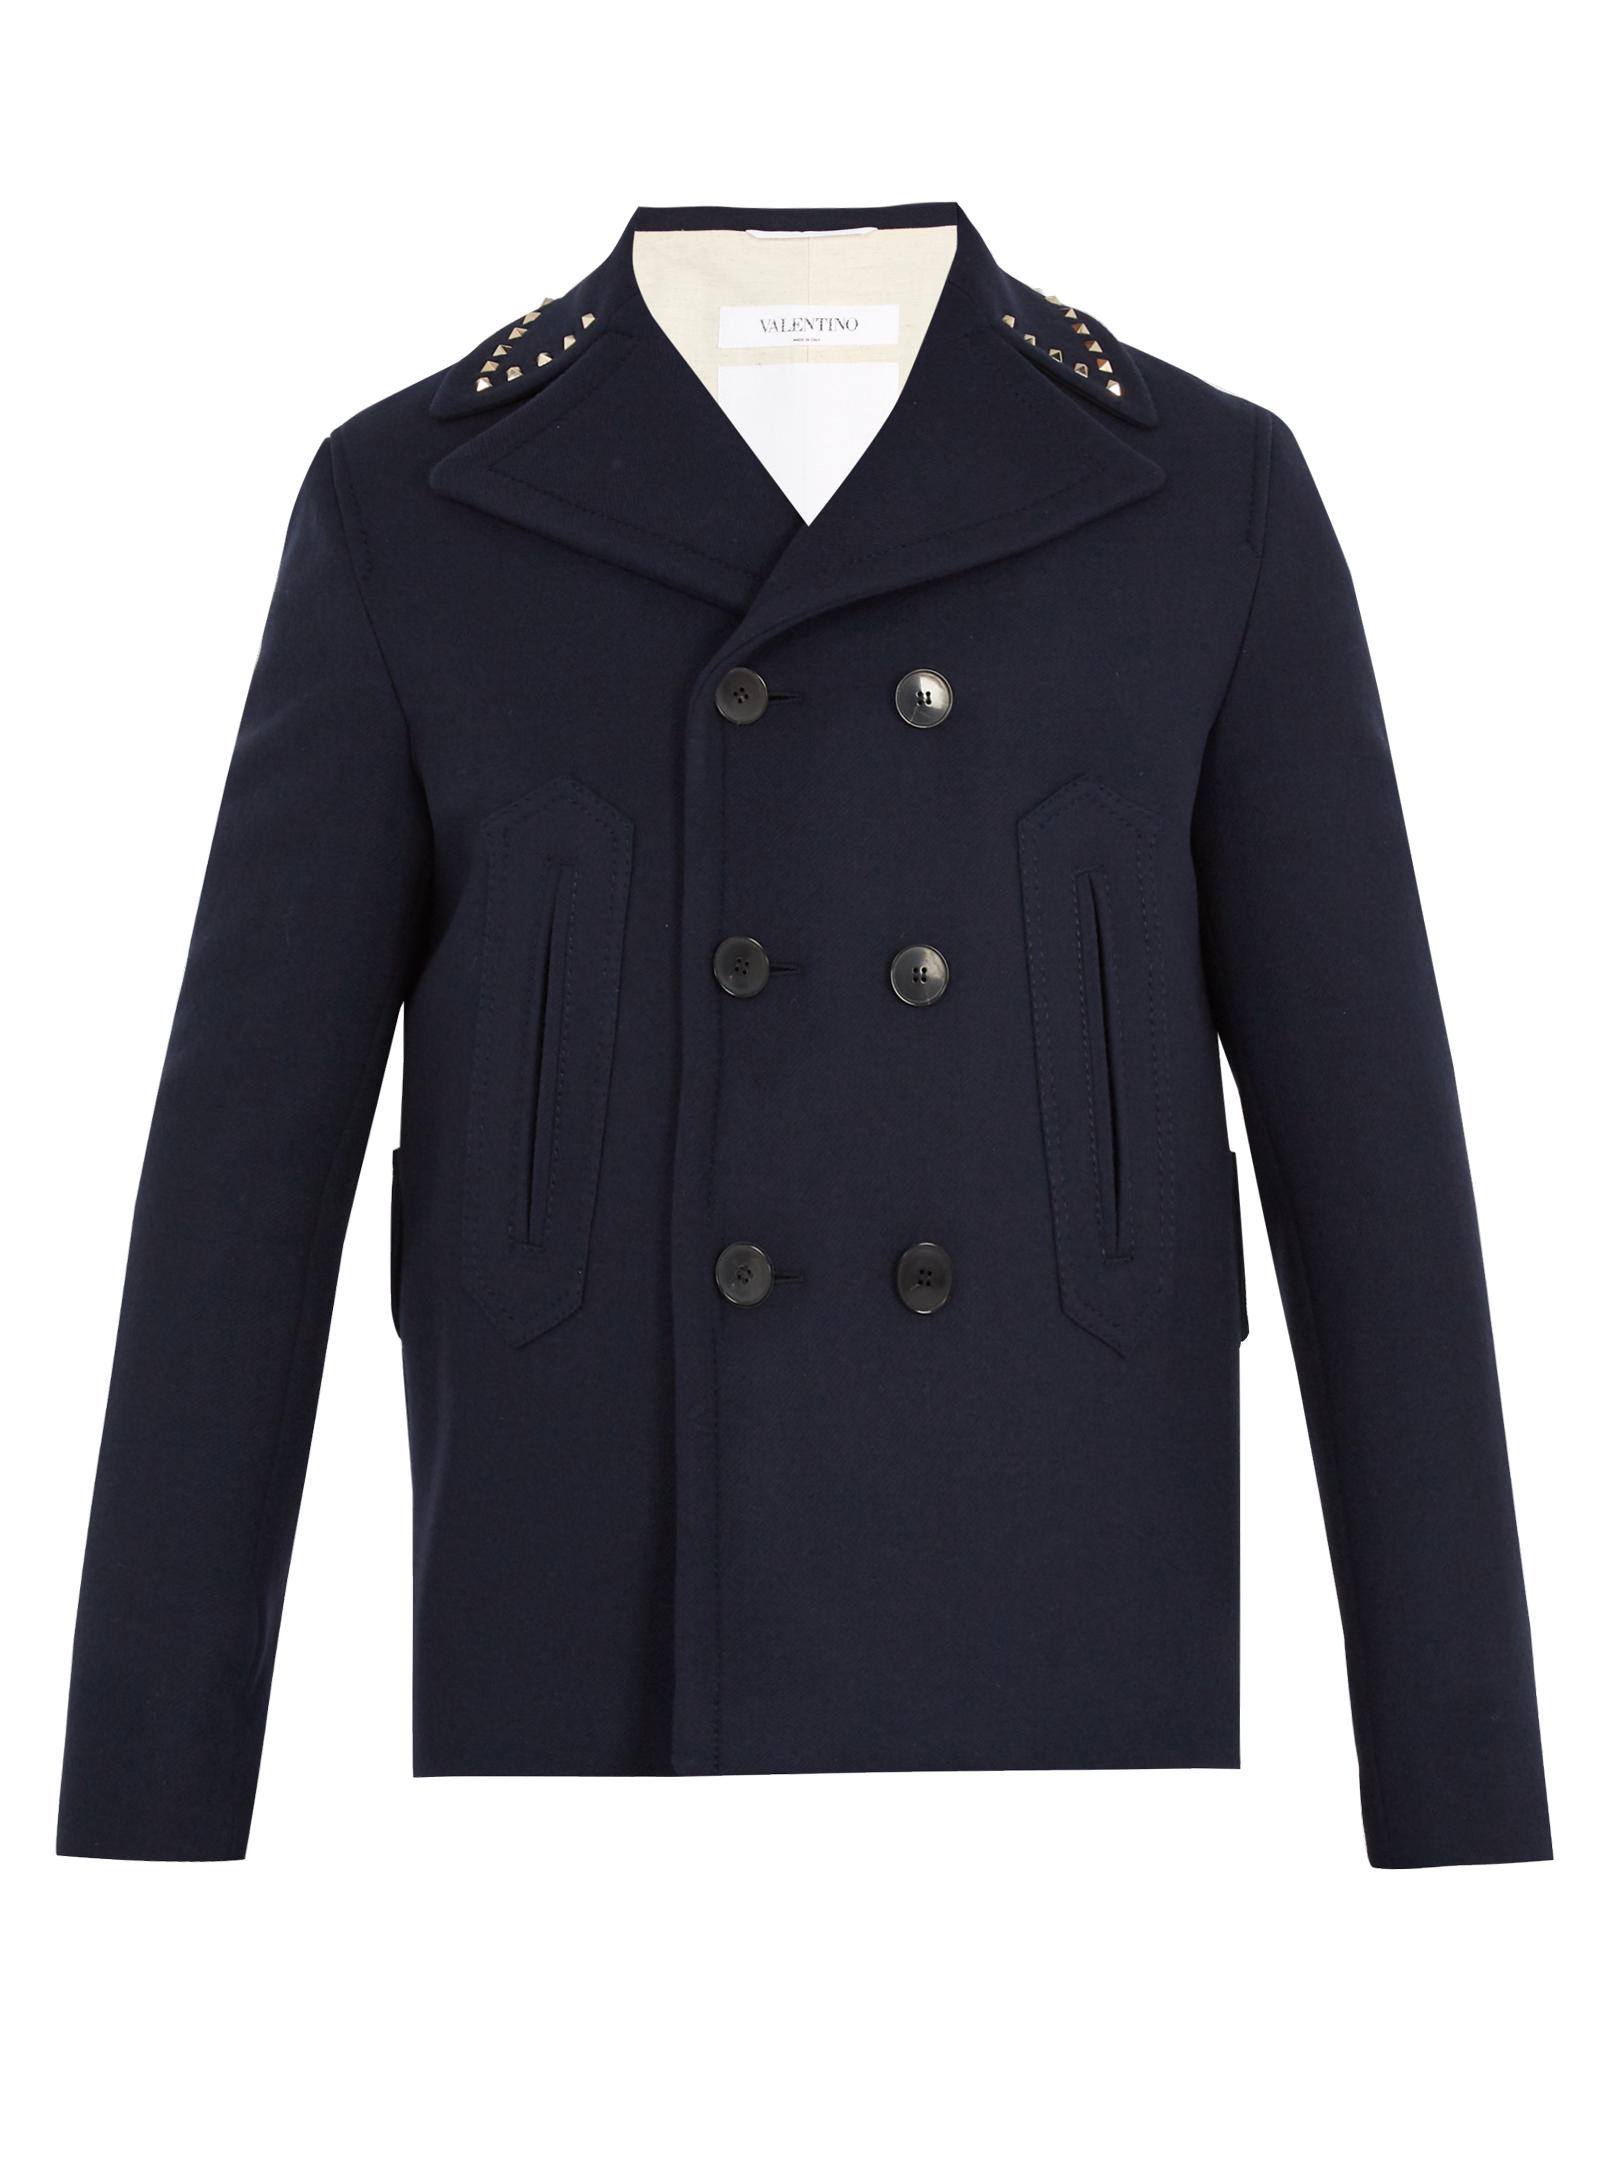 Valentino Rockstud Double-breasted Wool Pea Coat Navy for Men - Lyst